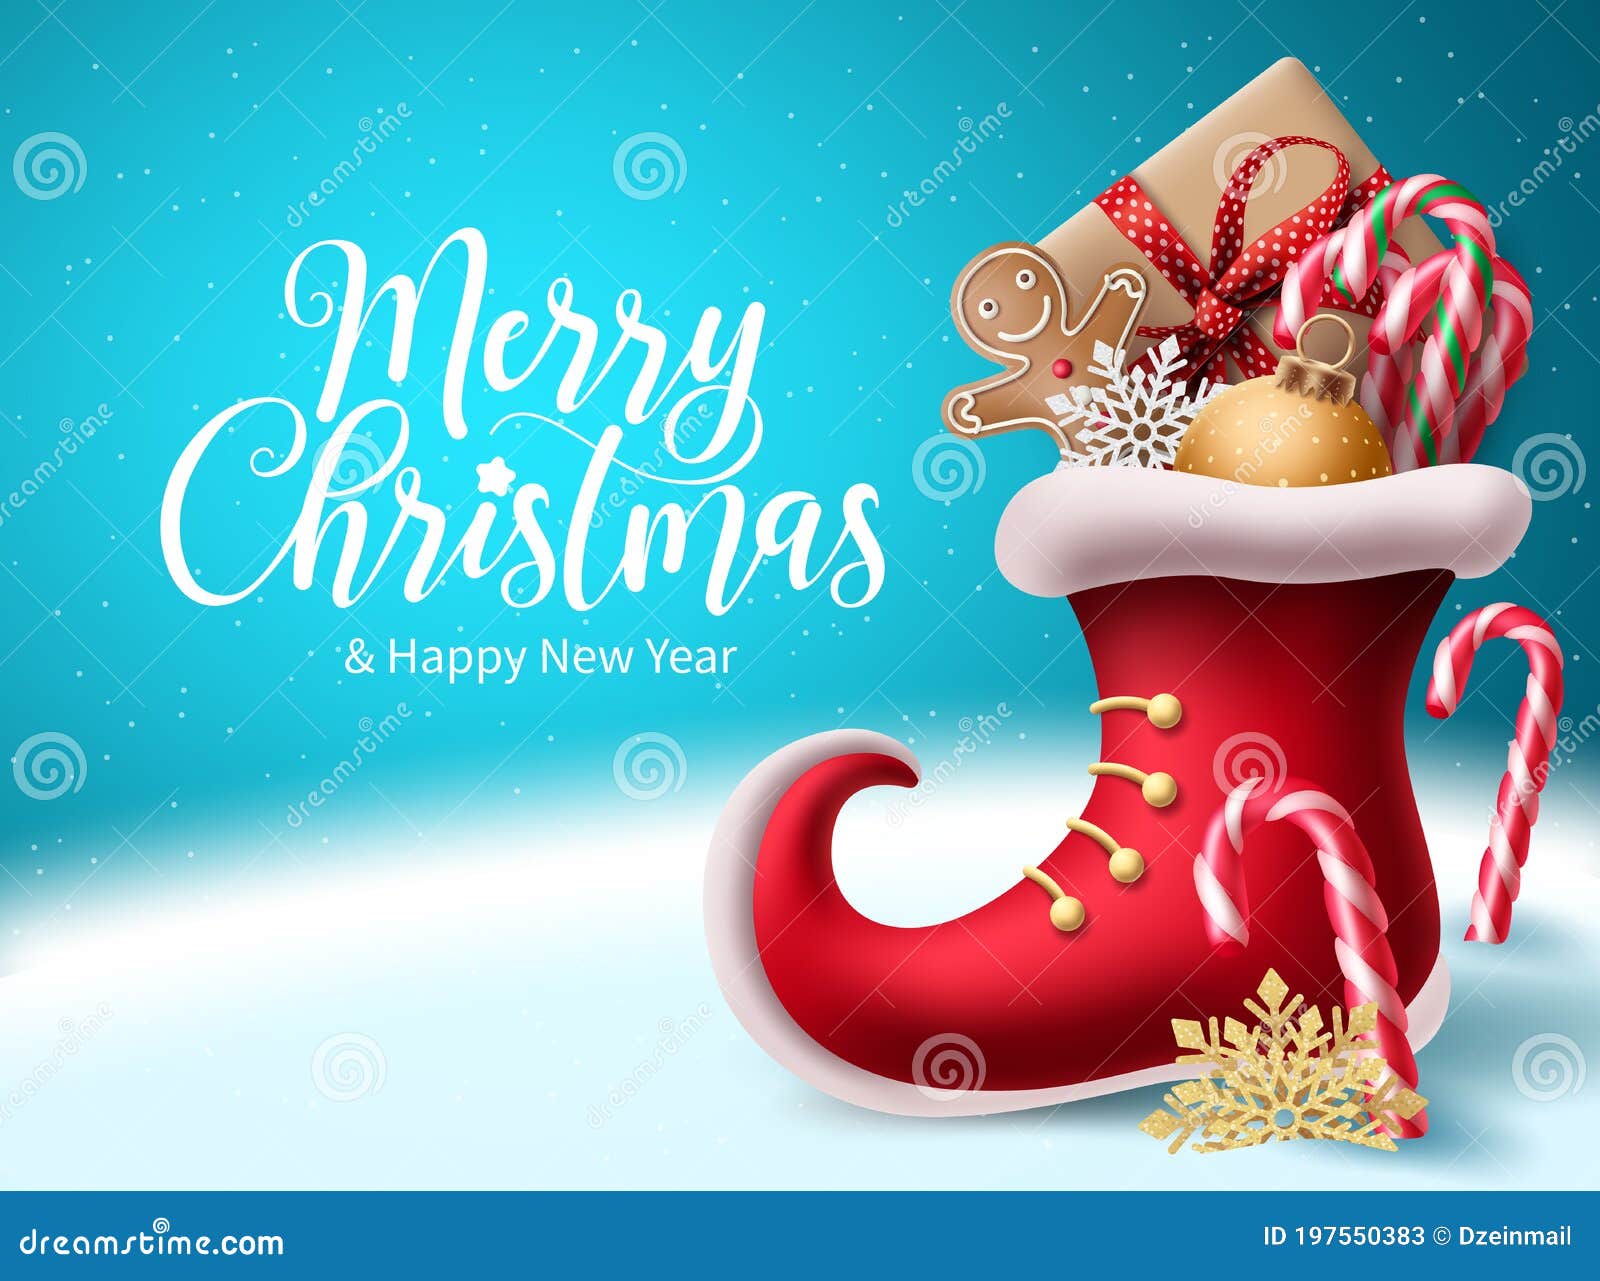 13,100+ Santa Claus Shoes Stock Photos, Pictures & Royalty-Free Images -  iStock | Santa claus boots